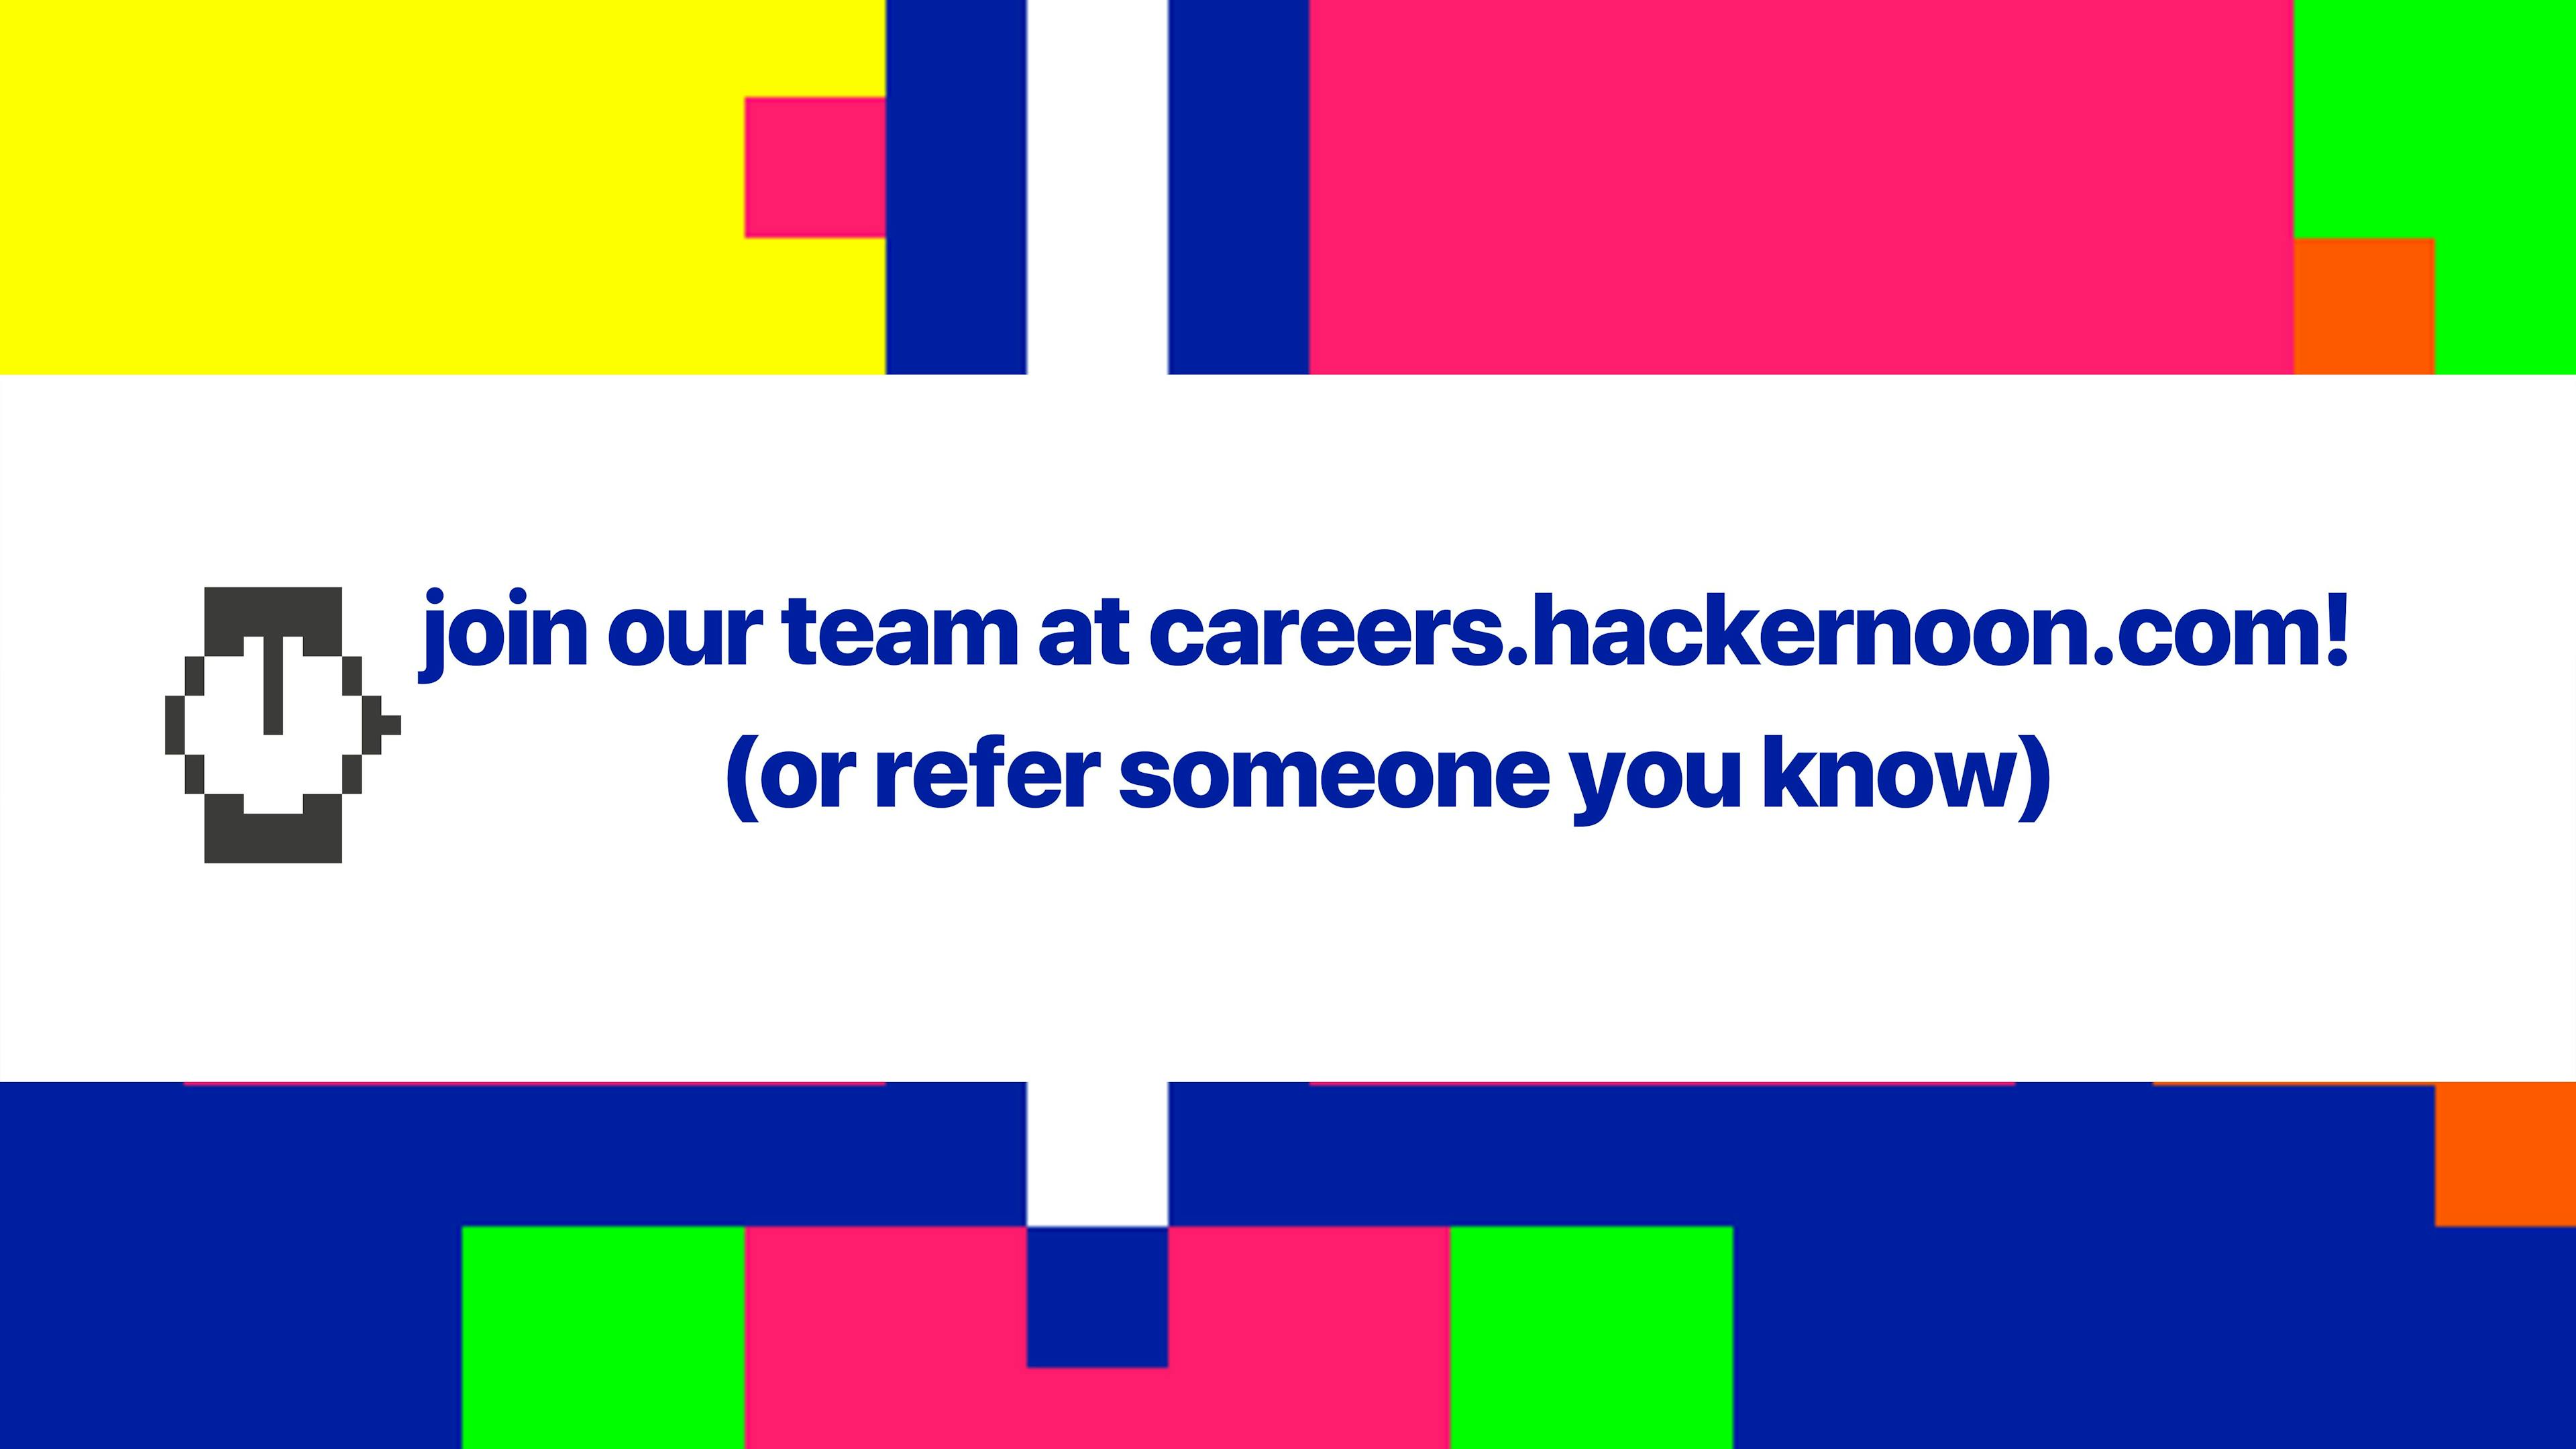 featured image - Inside HackerNoon: What Do Our Interns Do?